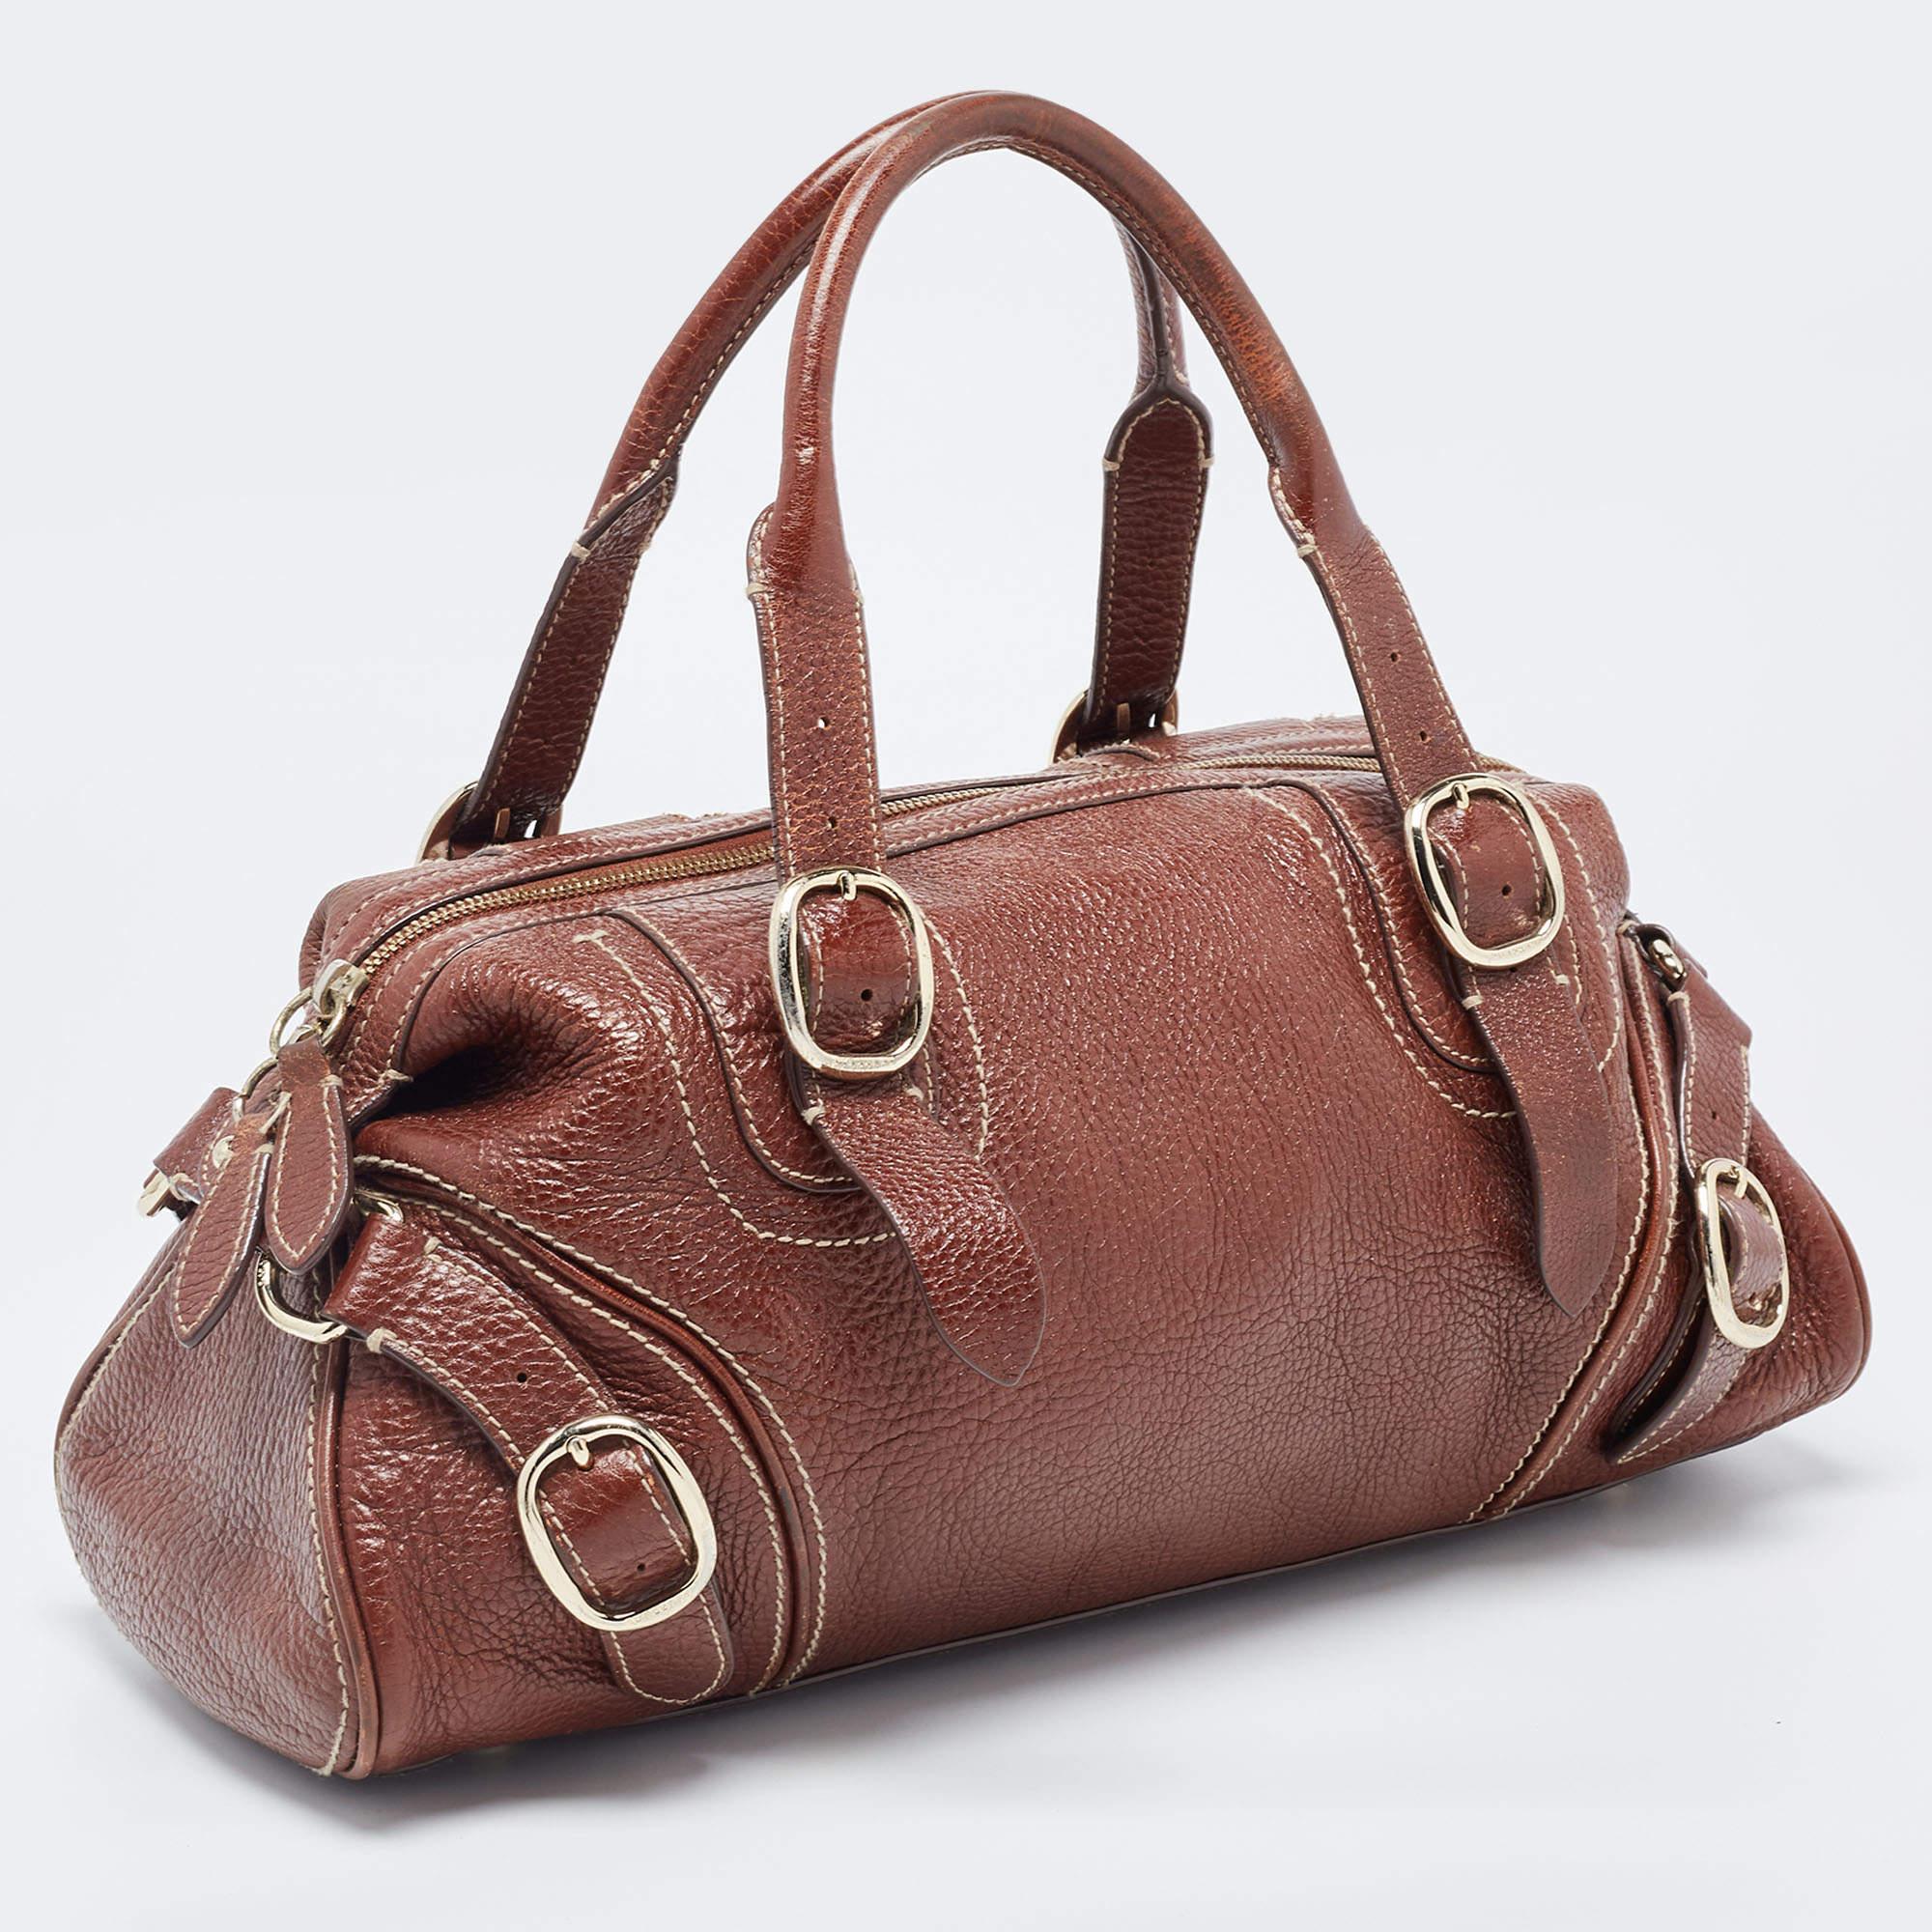 Women's Burberry Brown Leather Bowler Bag